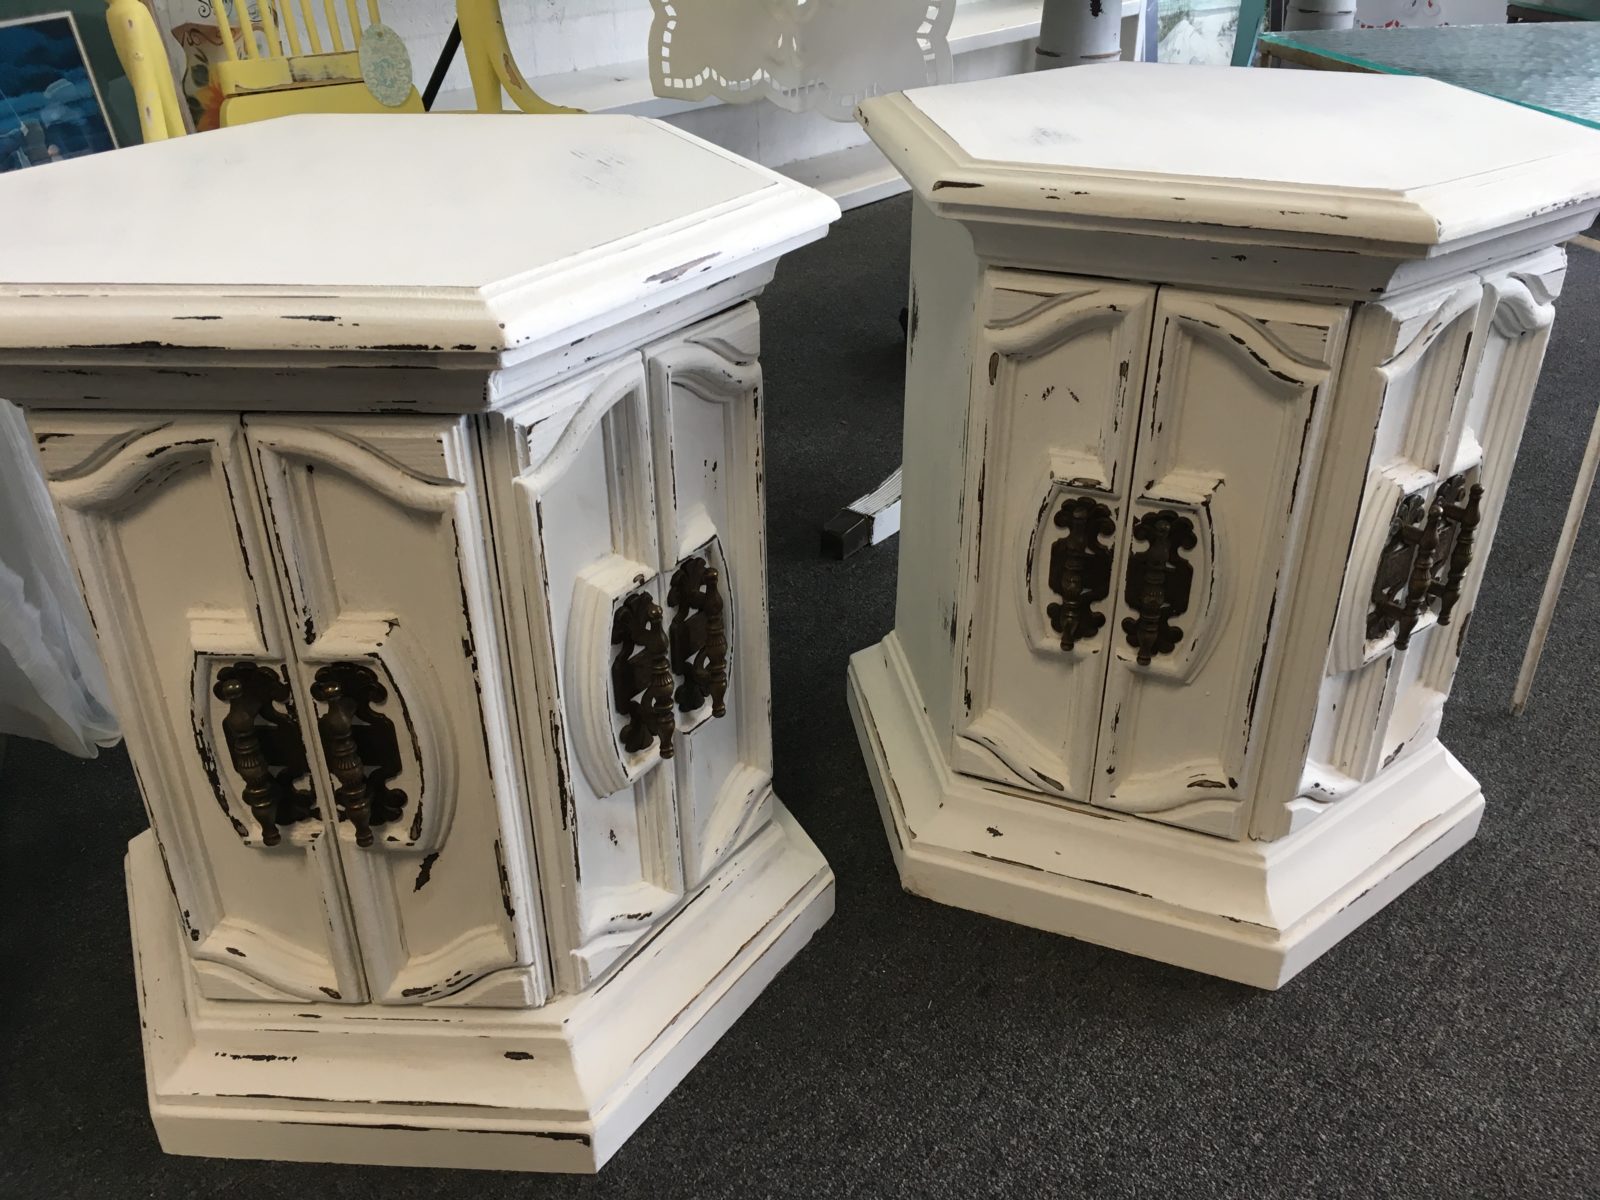 Chalk Paint End Tables • Very unique chalk painted matching hexagon tables, perfect for a unique spin on night stands or living room end tables. Original decorative hardware with storage underneath.